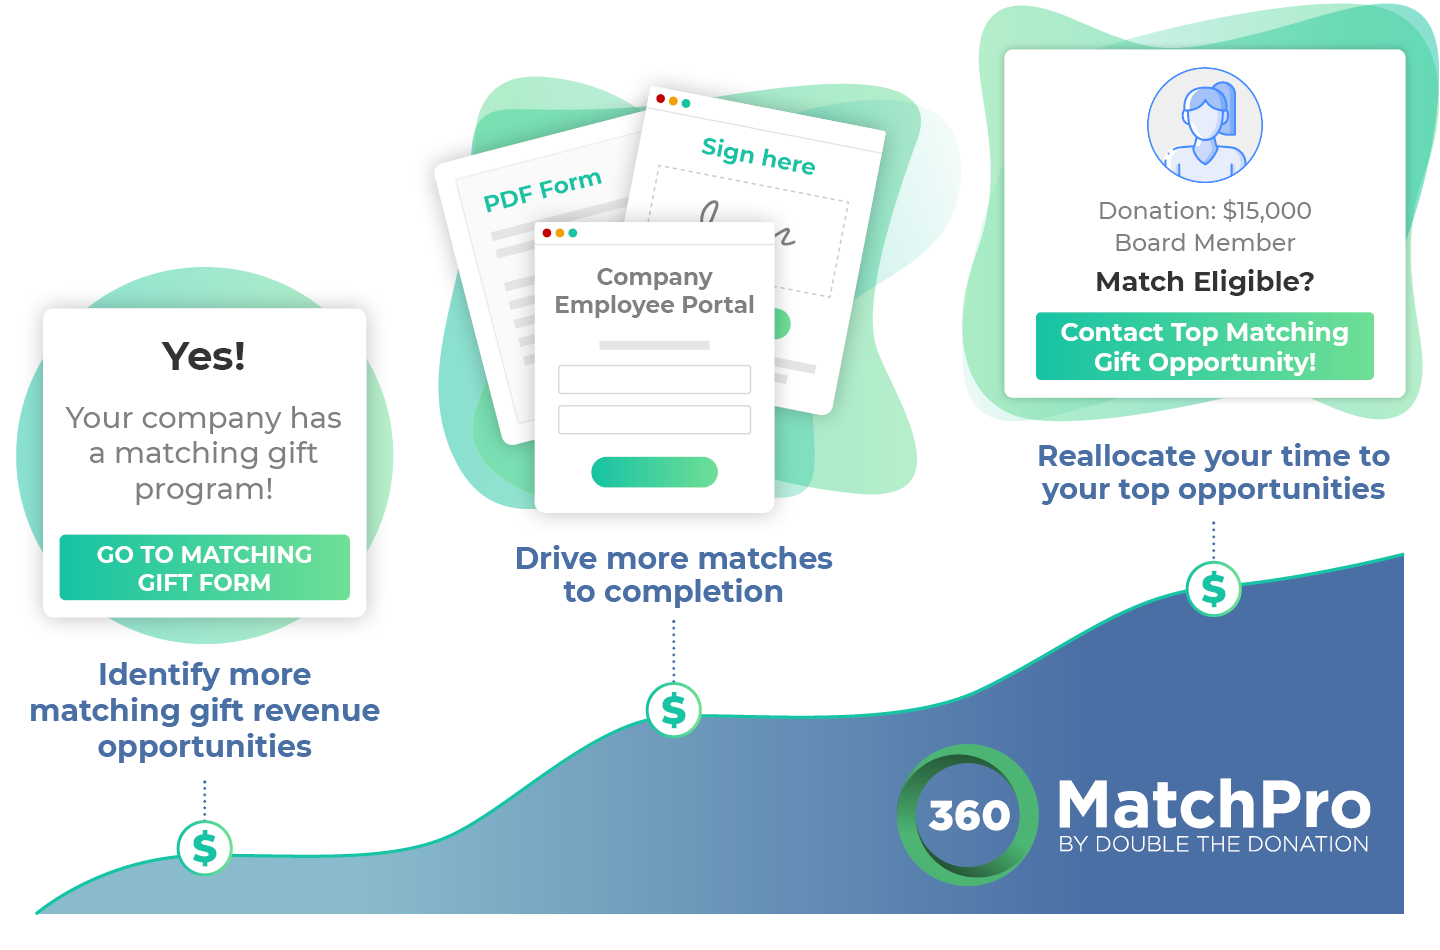 This image shows the features of 360MatchPro alongside an increasing graph to represent increasing donations.